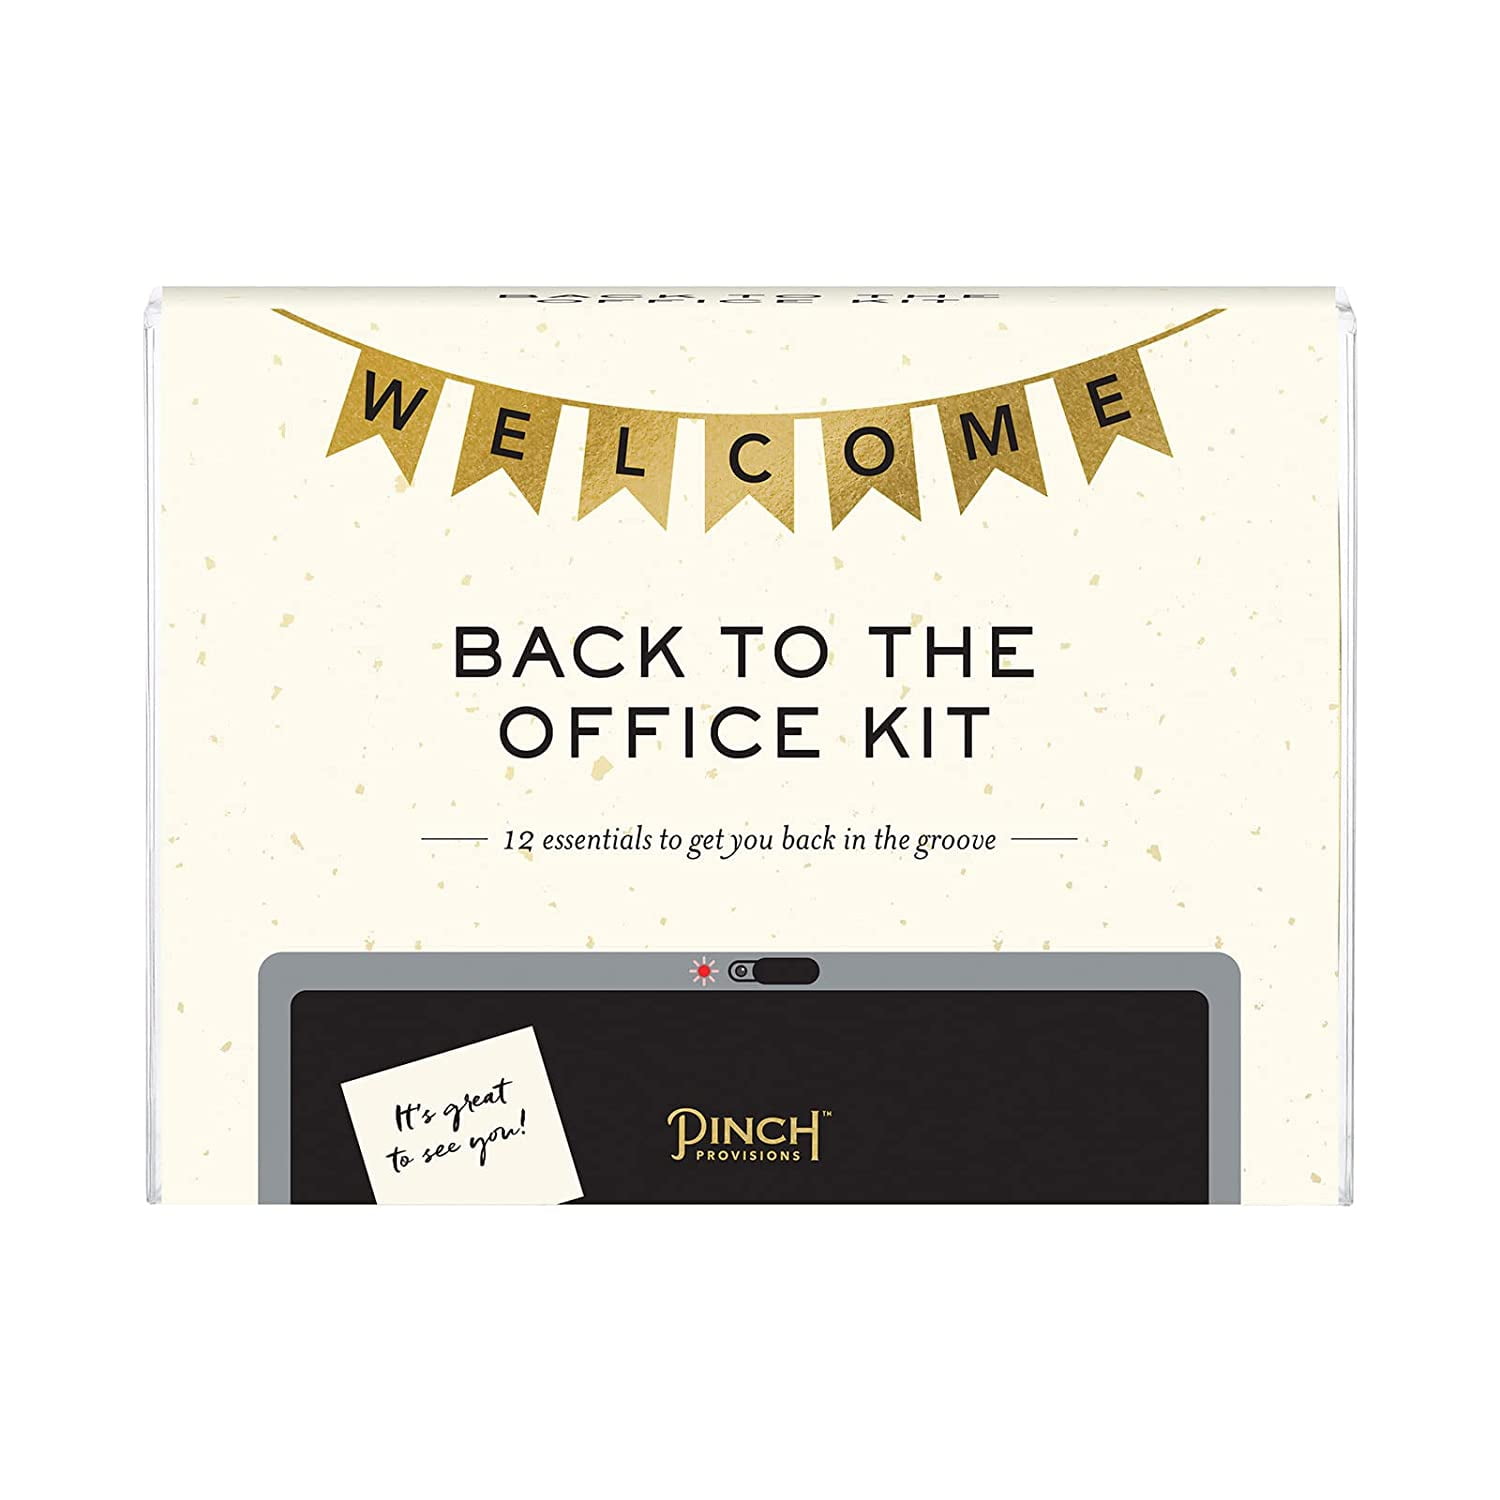 Back to the Office Essentials - my Work Essentials - katygoodship